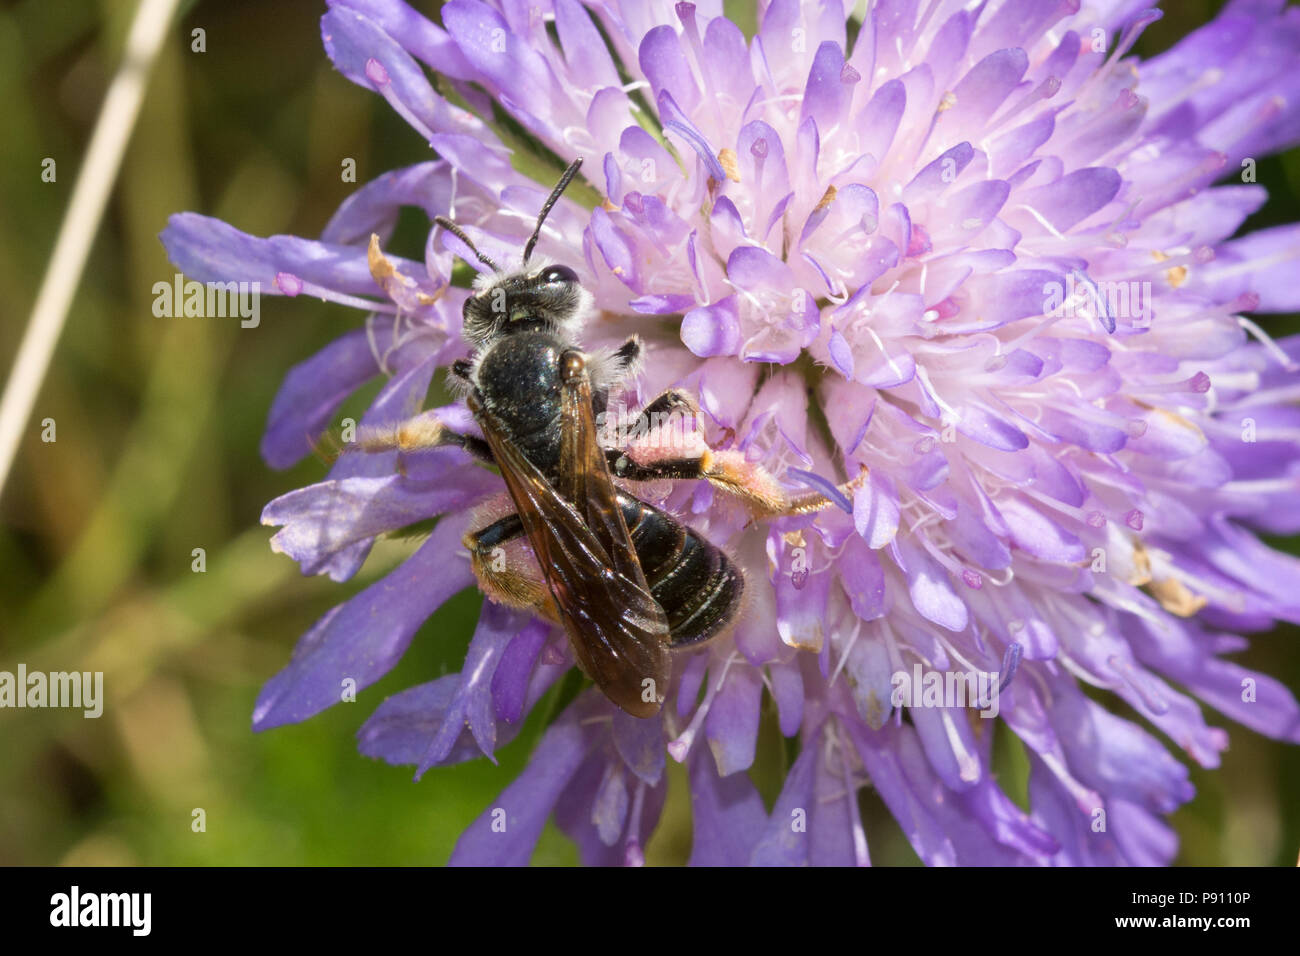 Large scabious mining bee (Andrena hattorfiana) with pink pollen baskets, on field scabious wildflower at Dry Sandford Pit, Oxfordshire, UK Stock Photo